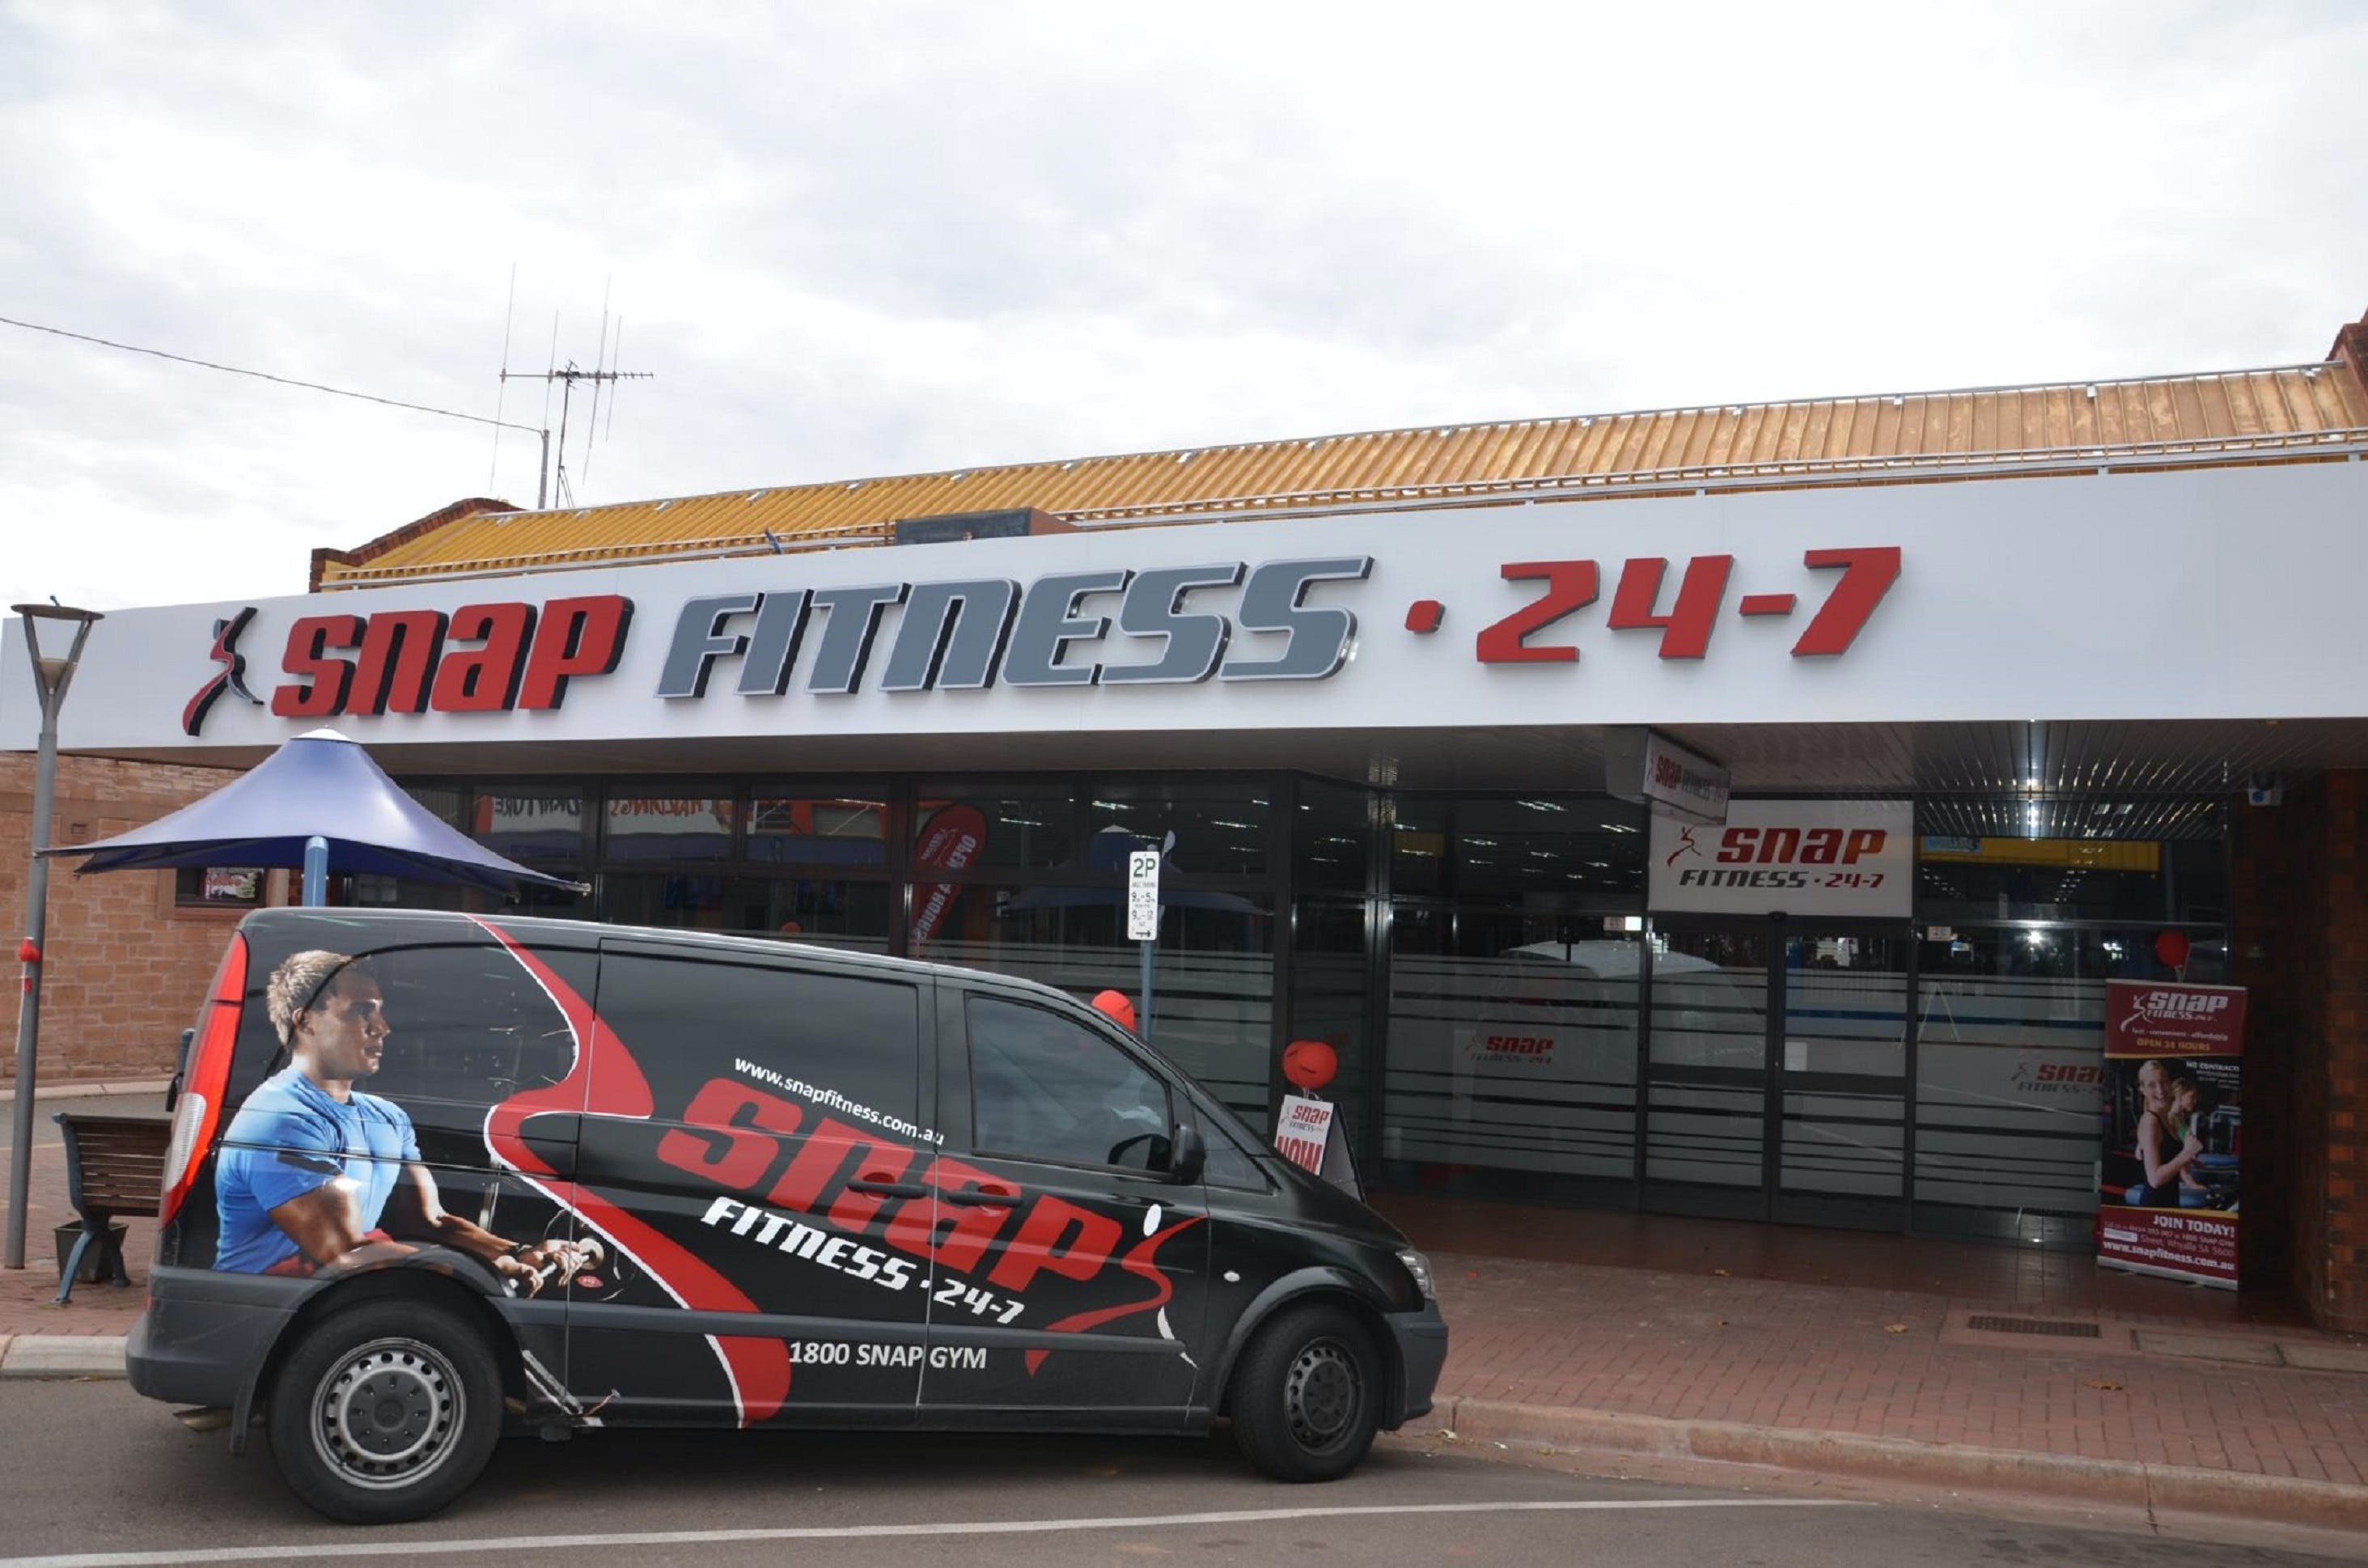 Snap Fitness Whyalla 24/7 gym - Accommodation Mermaid Beach